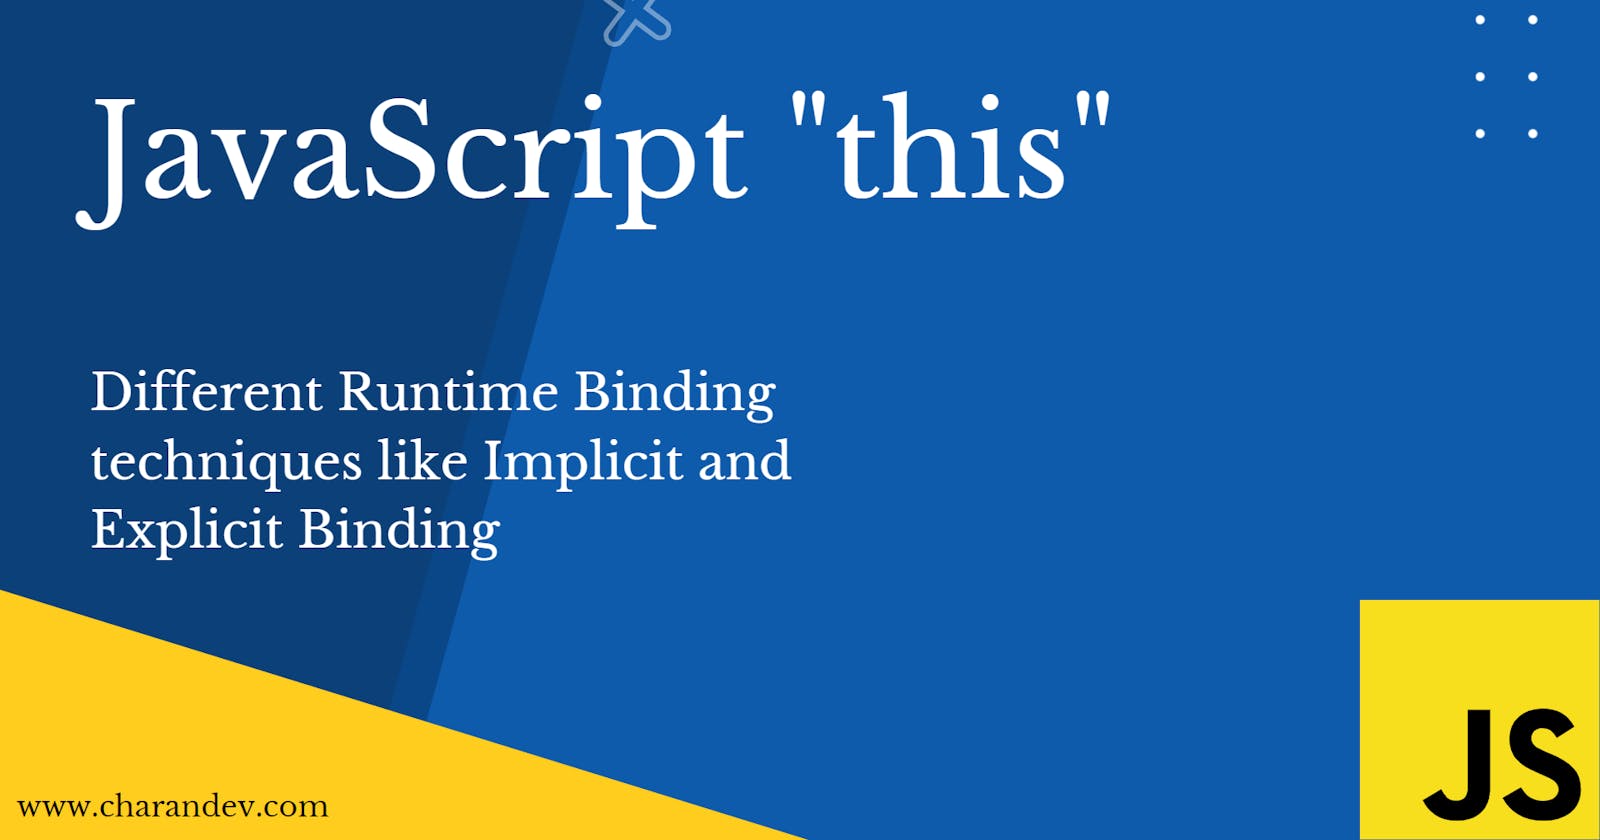 Understanding JavaScript "this" | Different Runtime Binding techniques